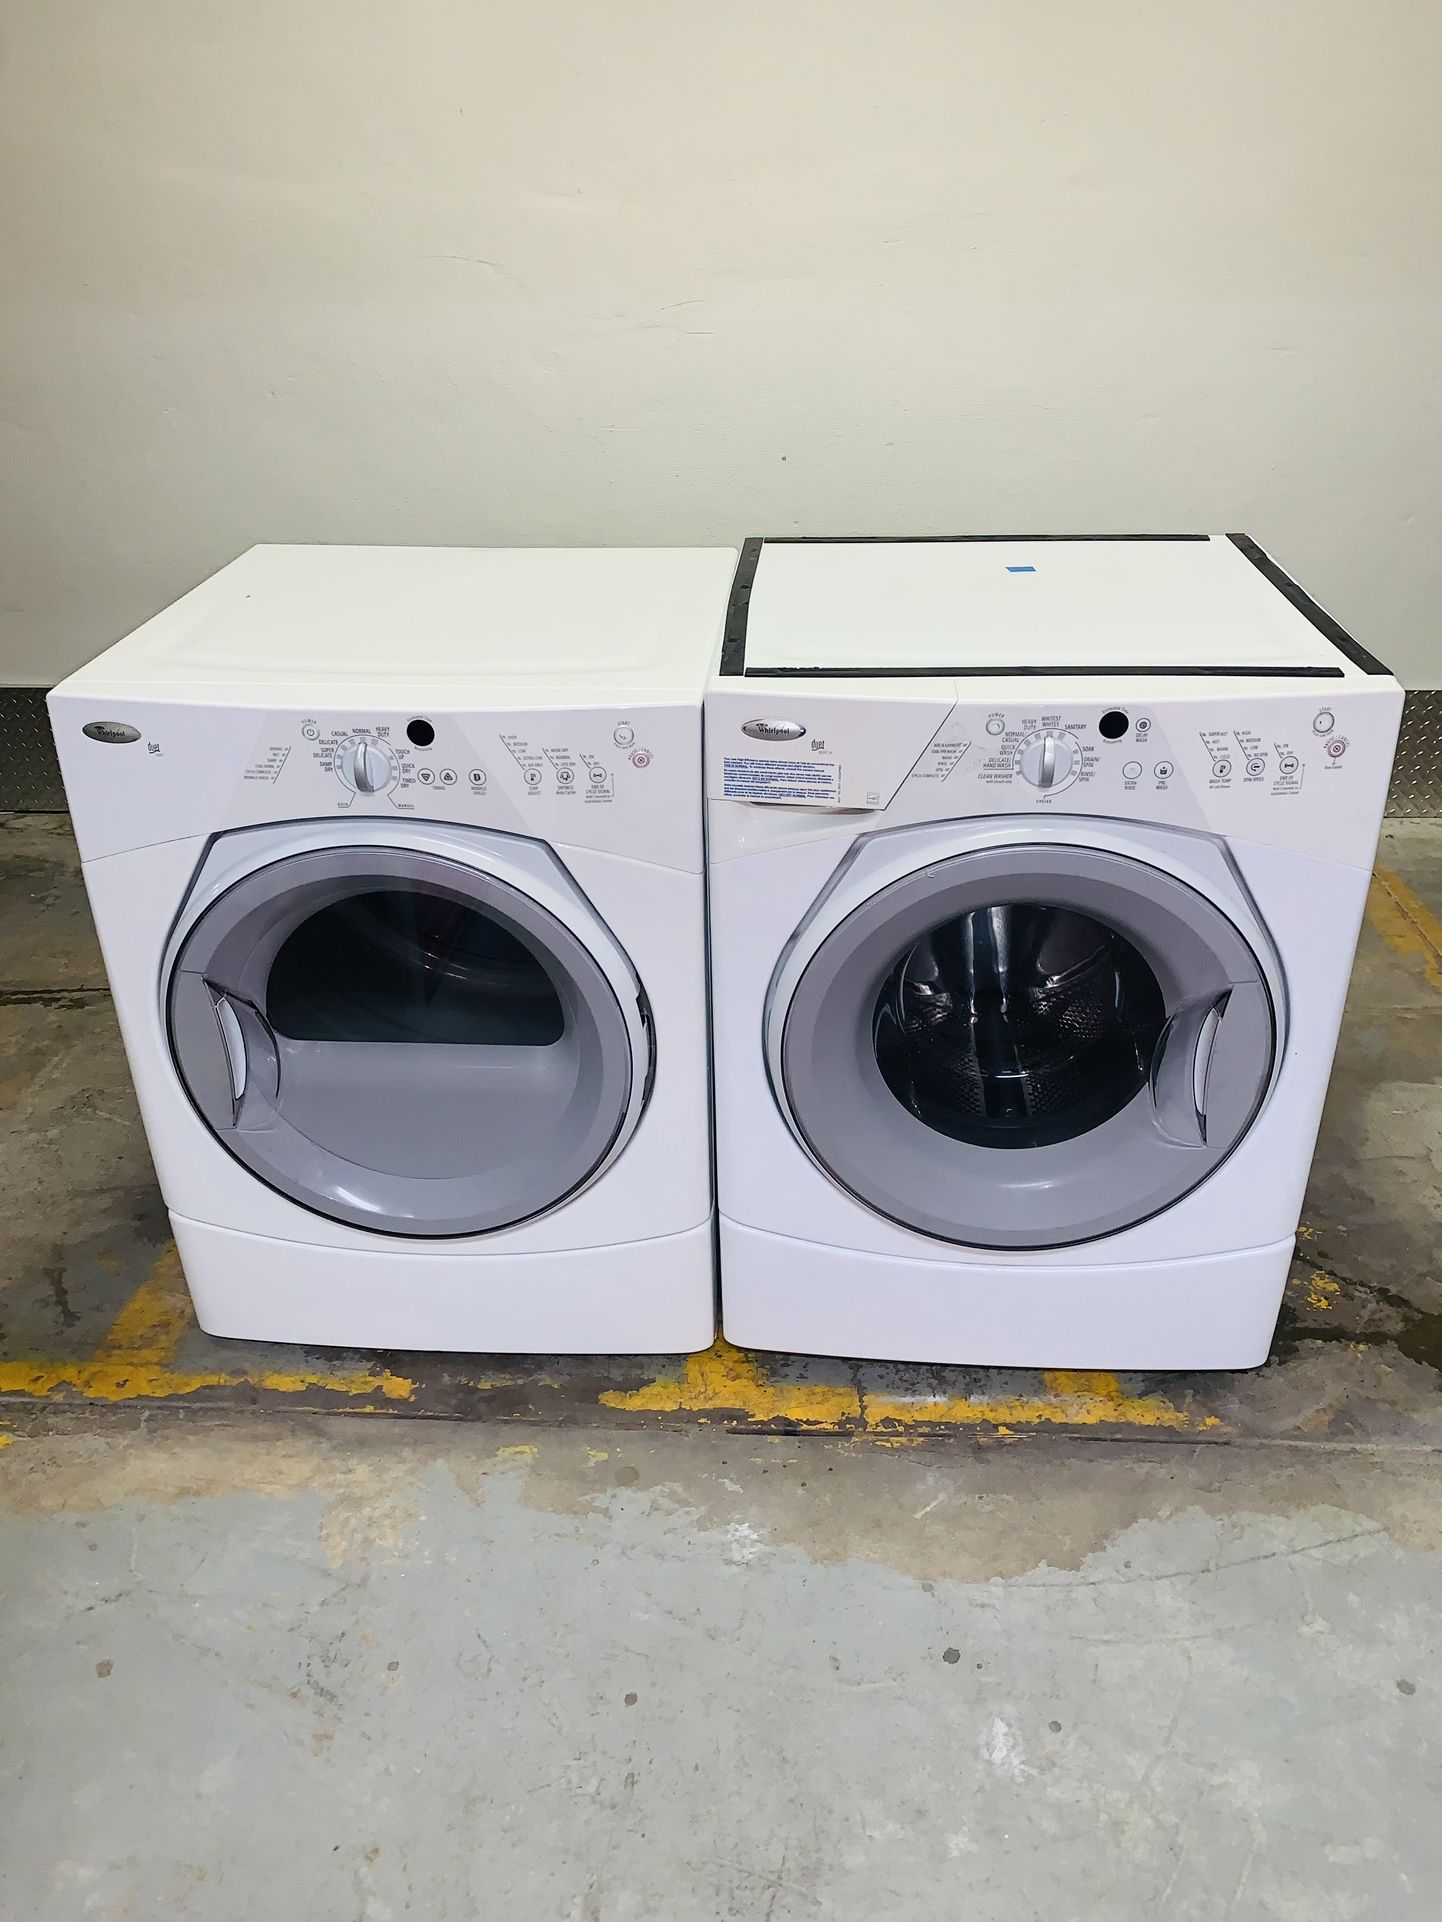 whirlpool washer and dryer in very perfect condition a receipt for 90 days warranty